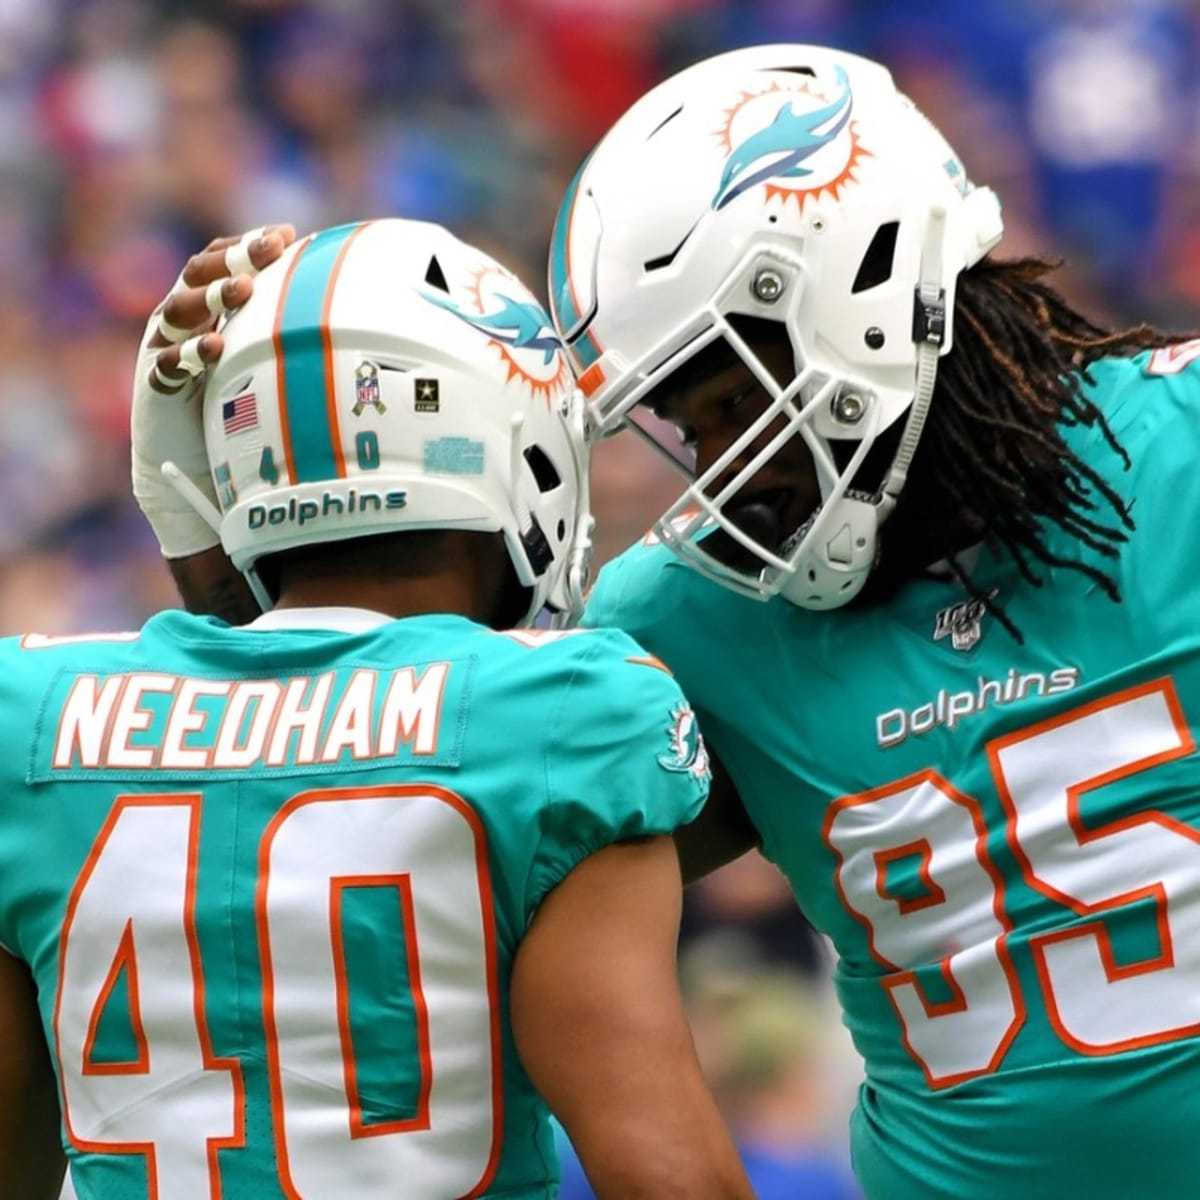 Miami Dolphins defensive tackle John Jenkins (77) walks off the